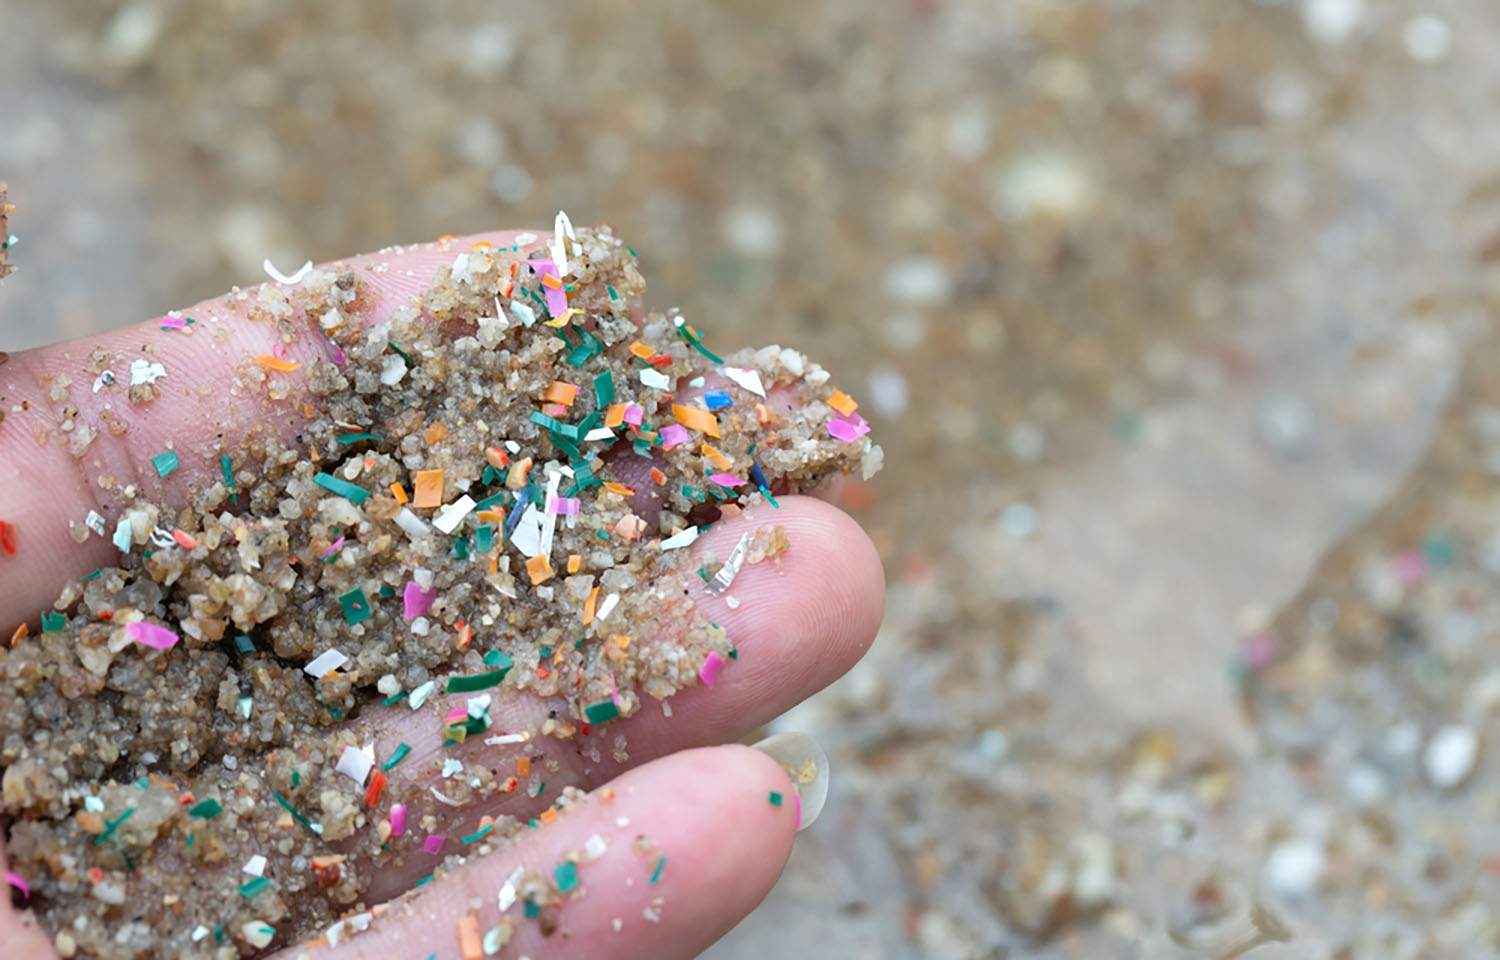 Research finds microplastics almost equally present in all protein types,  including seafood | SeafoodSource